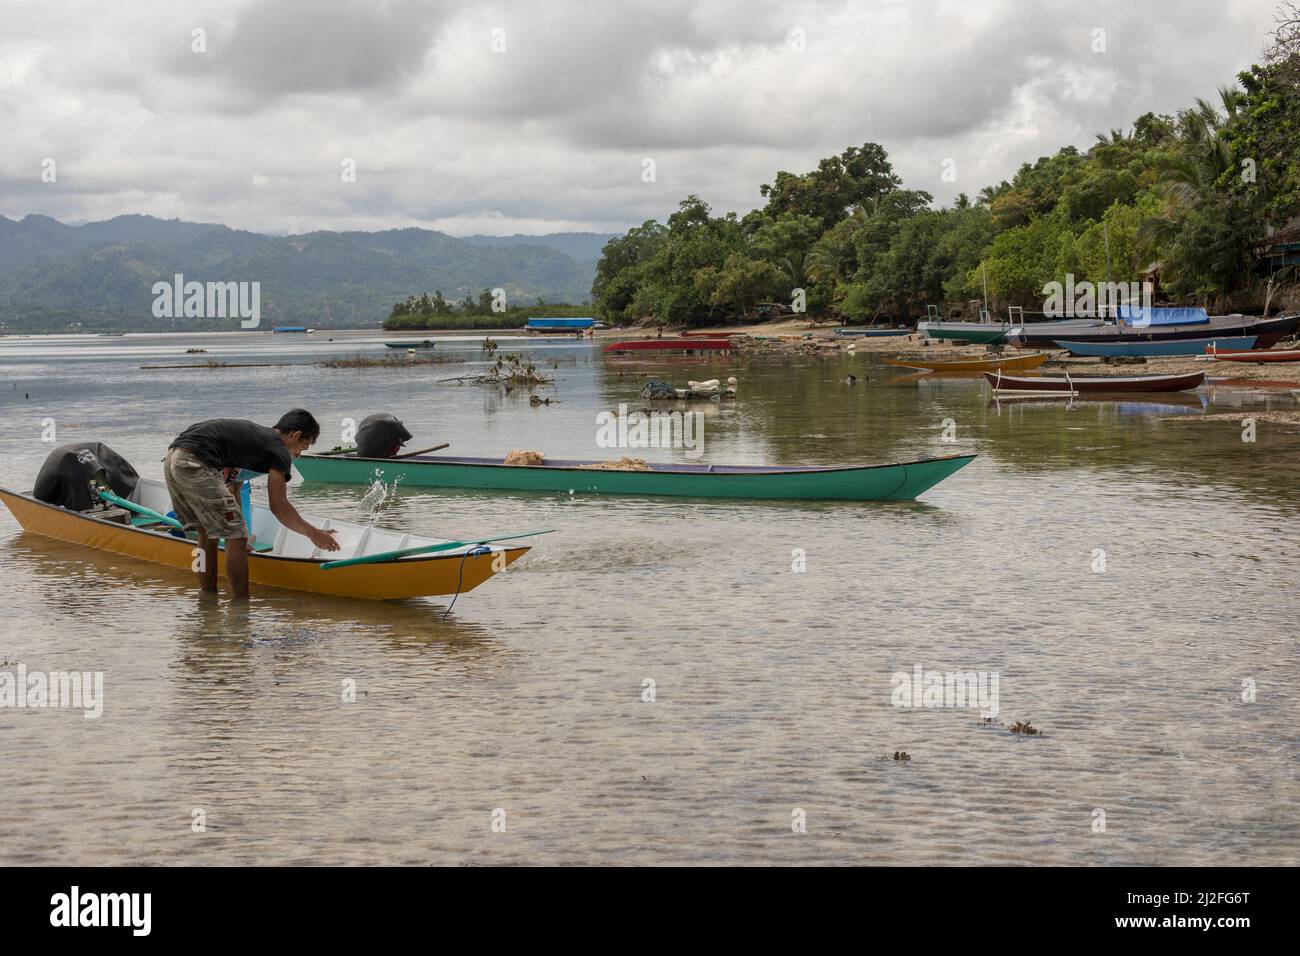 Small fishing boats anchor on the shoreline of Karampuang, Indoneisa, which is off the coast of Mamuju, Sulawesi. Stock Photo